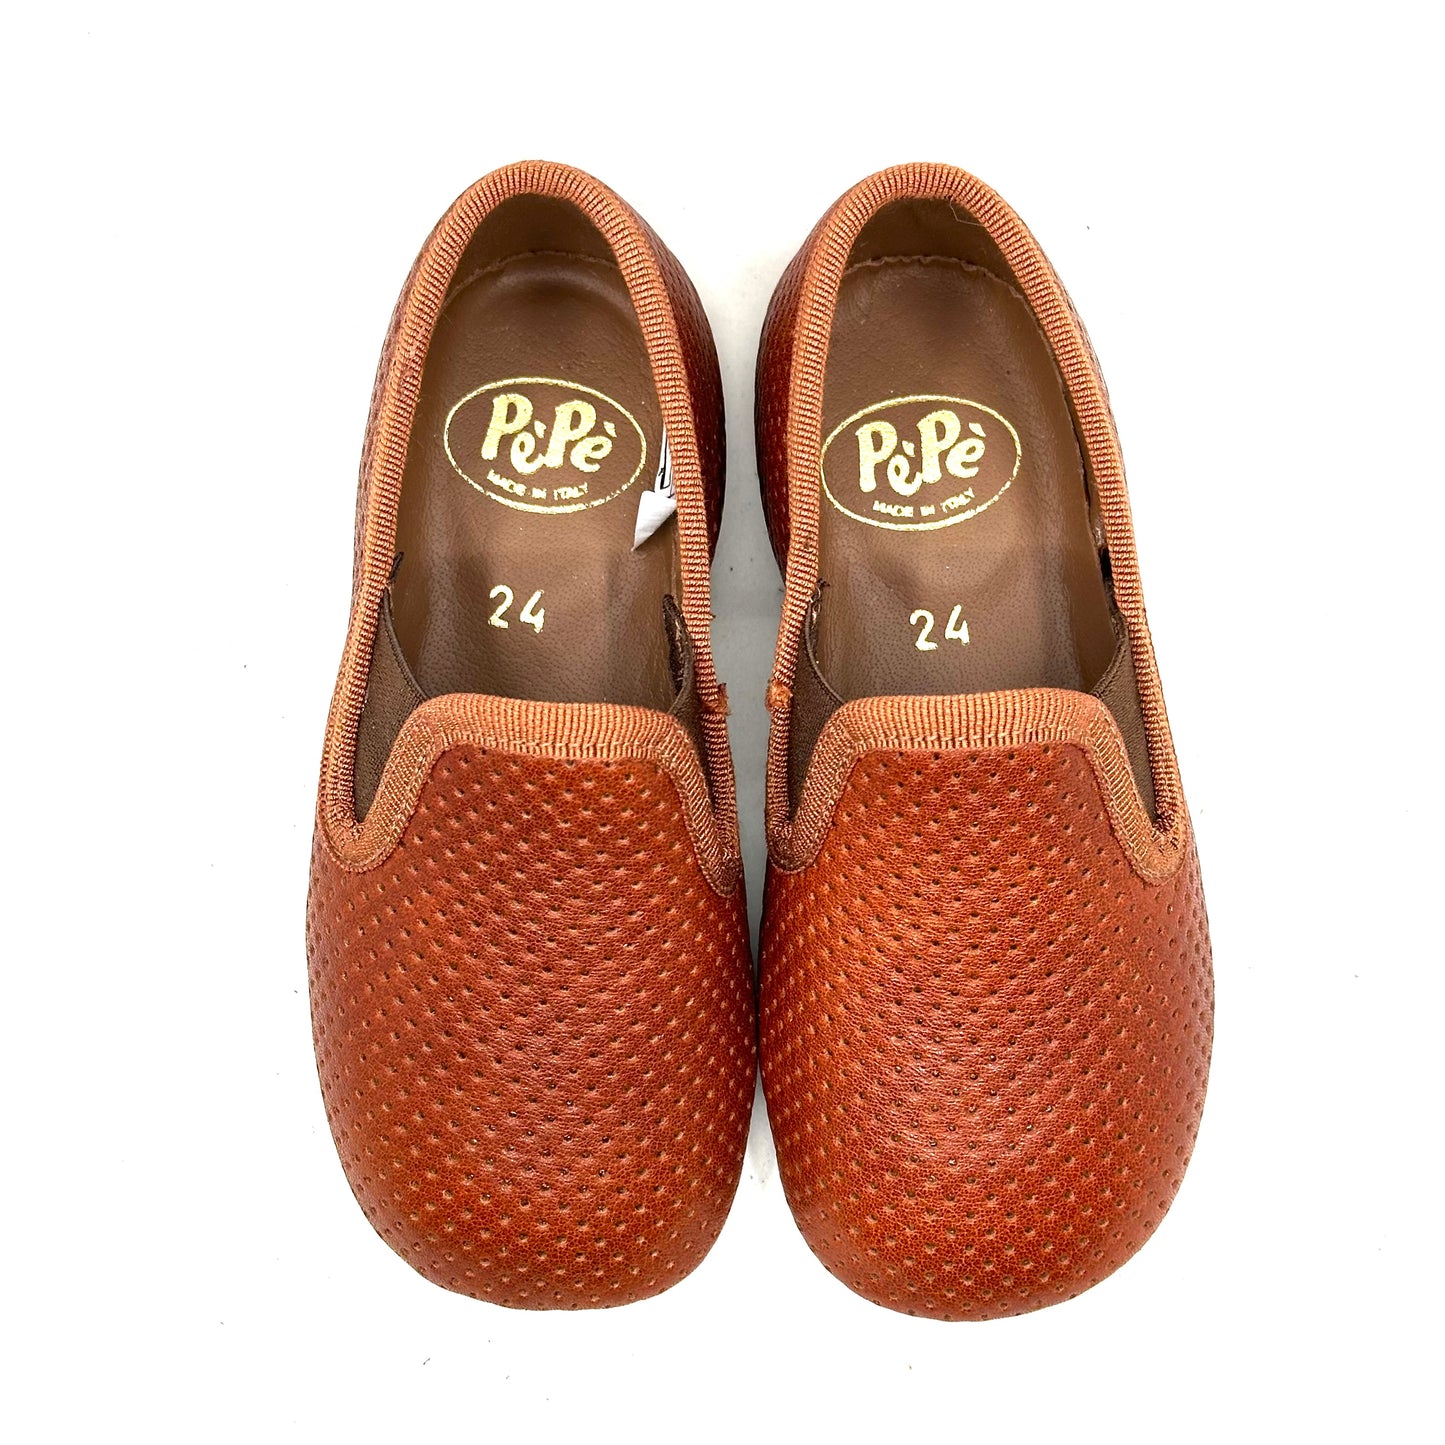 Pepe Chestnut Perforated Slip-On Loafer